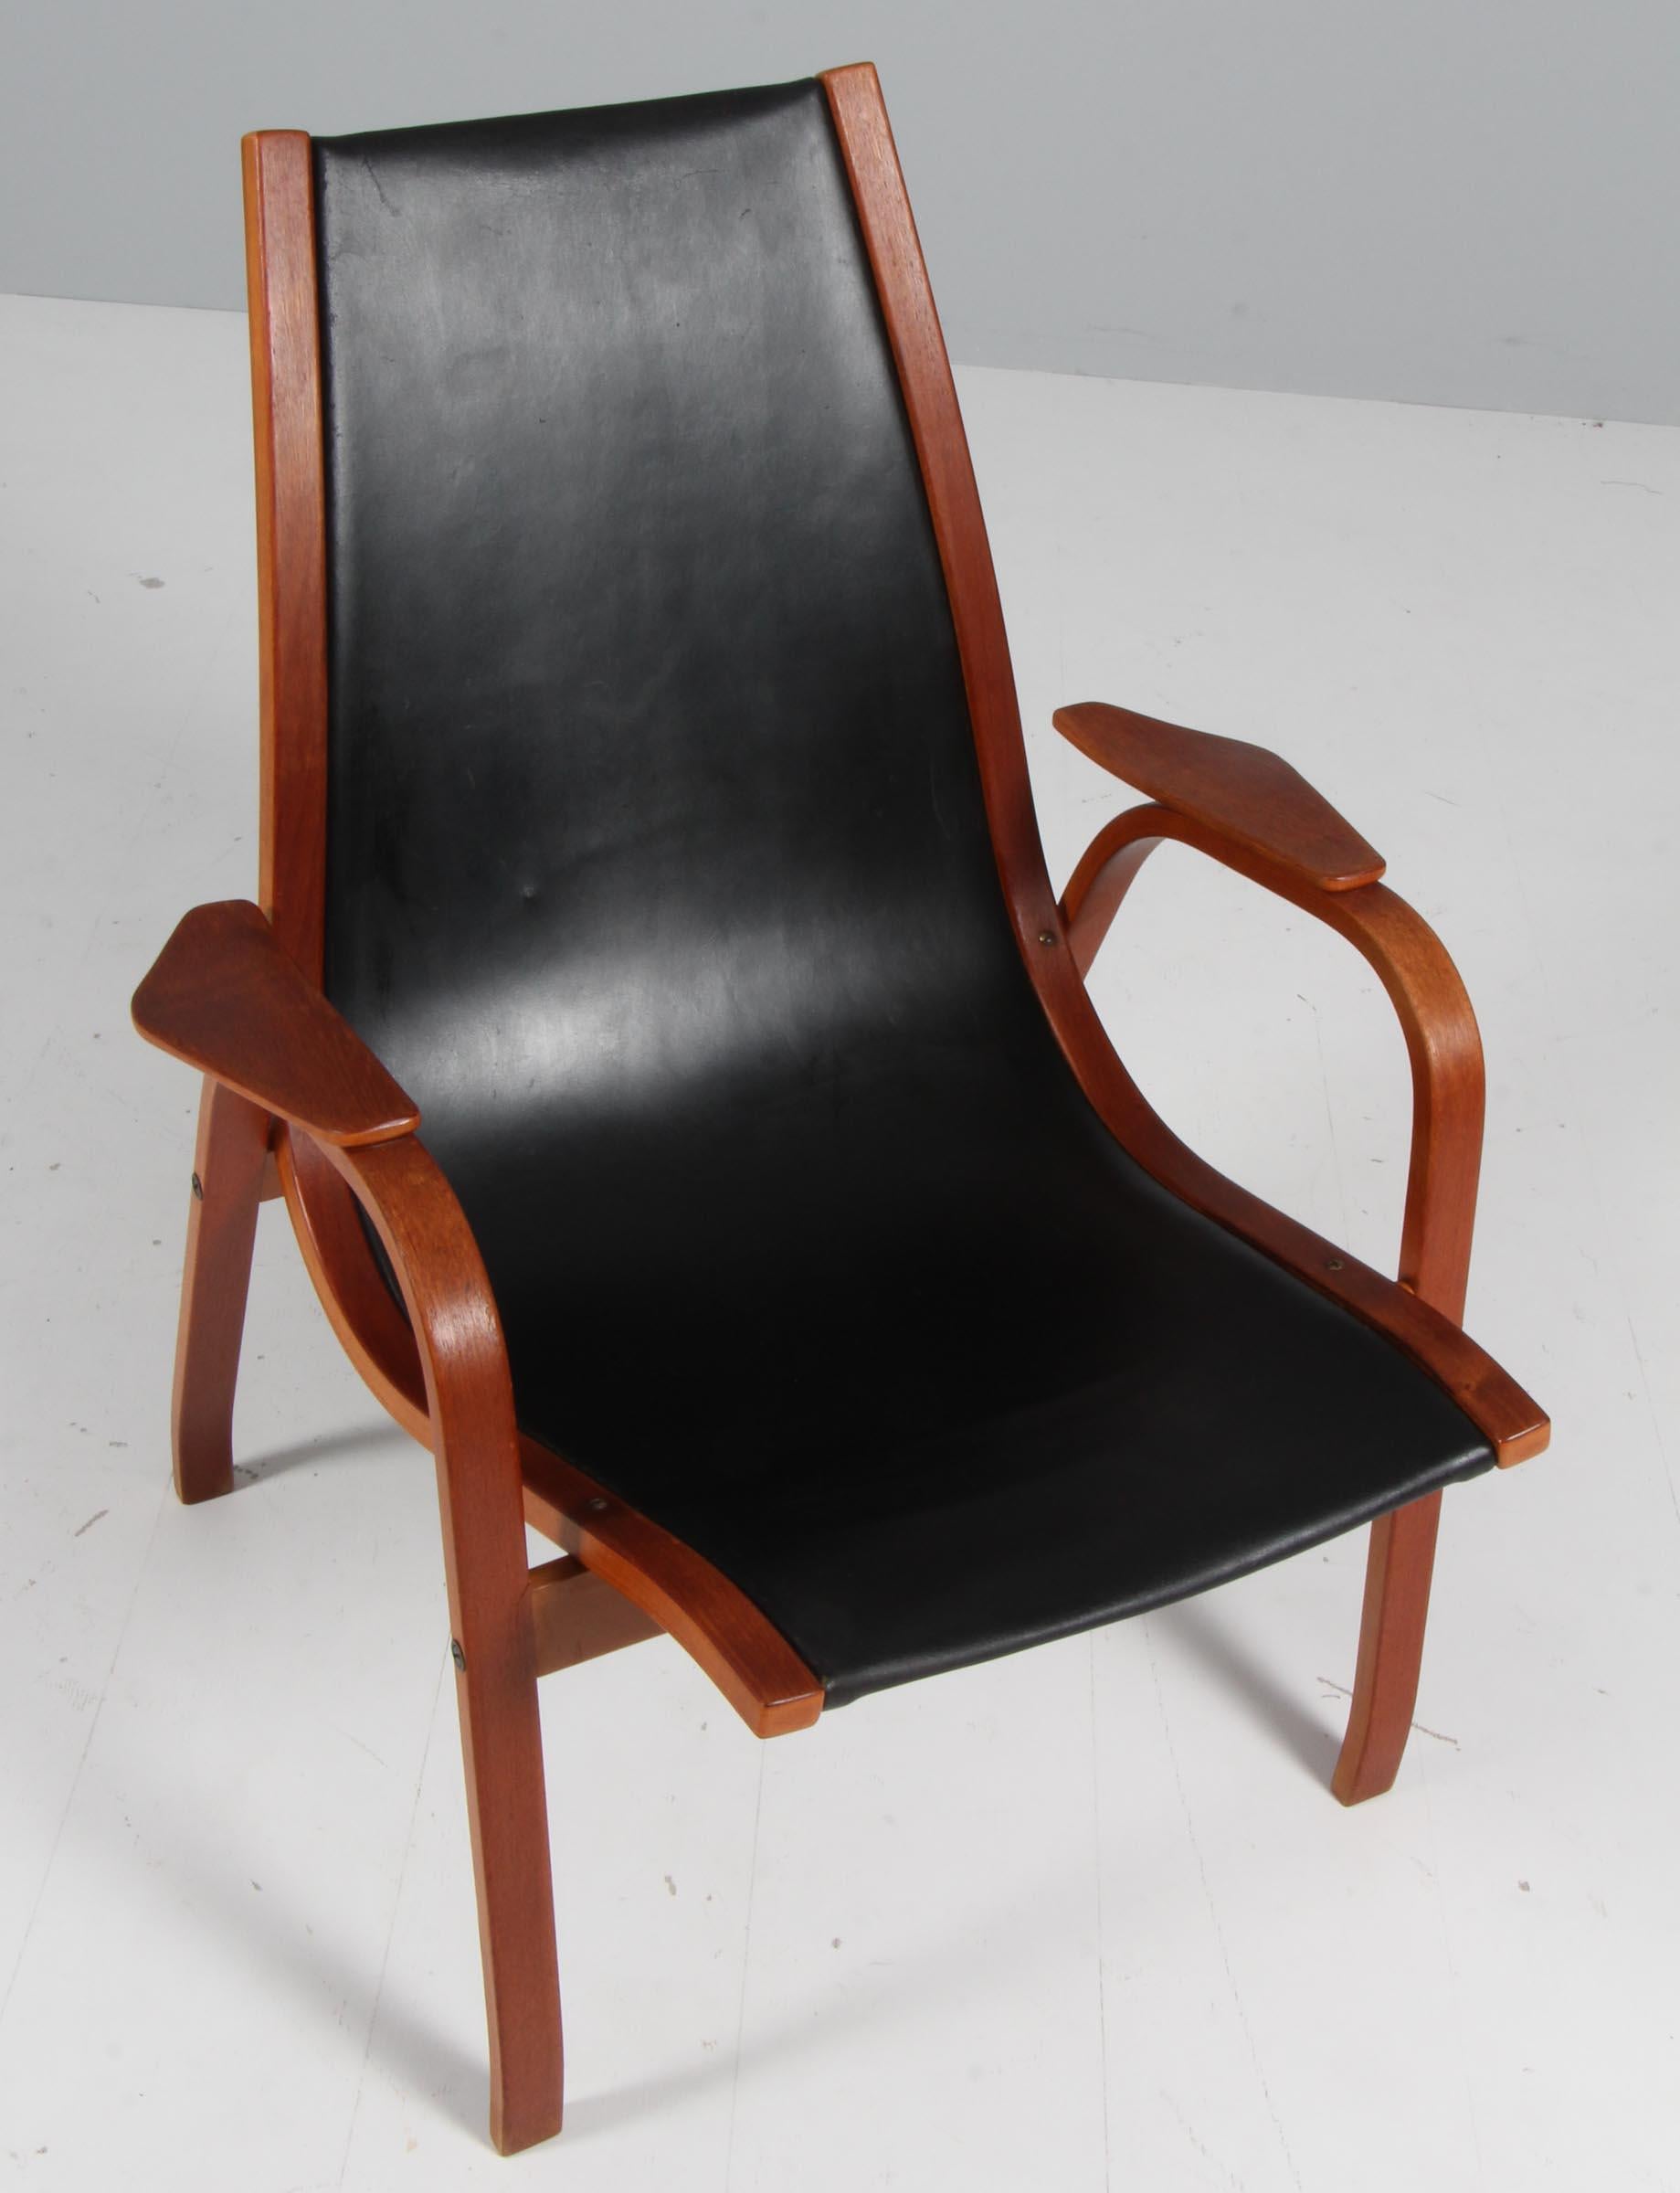 Yngve Ekström lounge chair with frame of beech and teak.

Original black core leather.

Model Kurva which was the design that have led to the iconic Lamino lounge chair. Made by ESE Möbler (later Swedese).